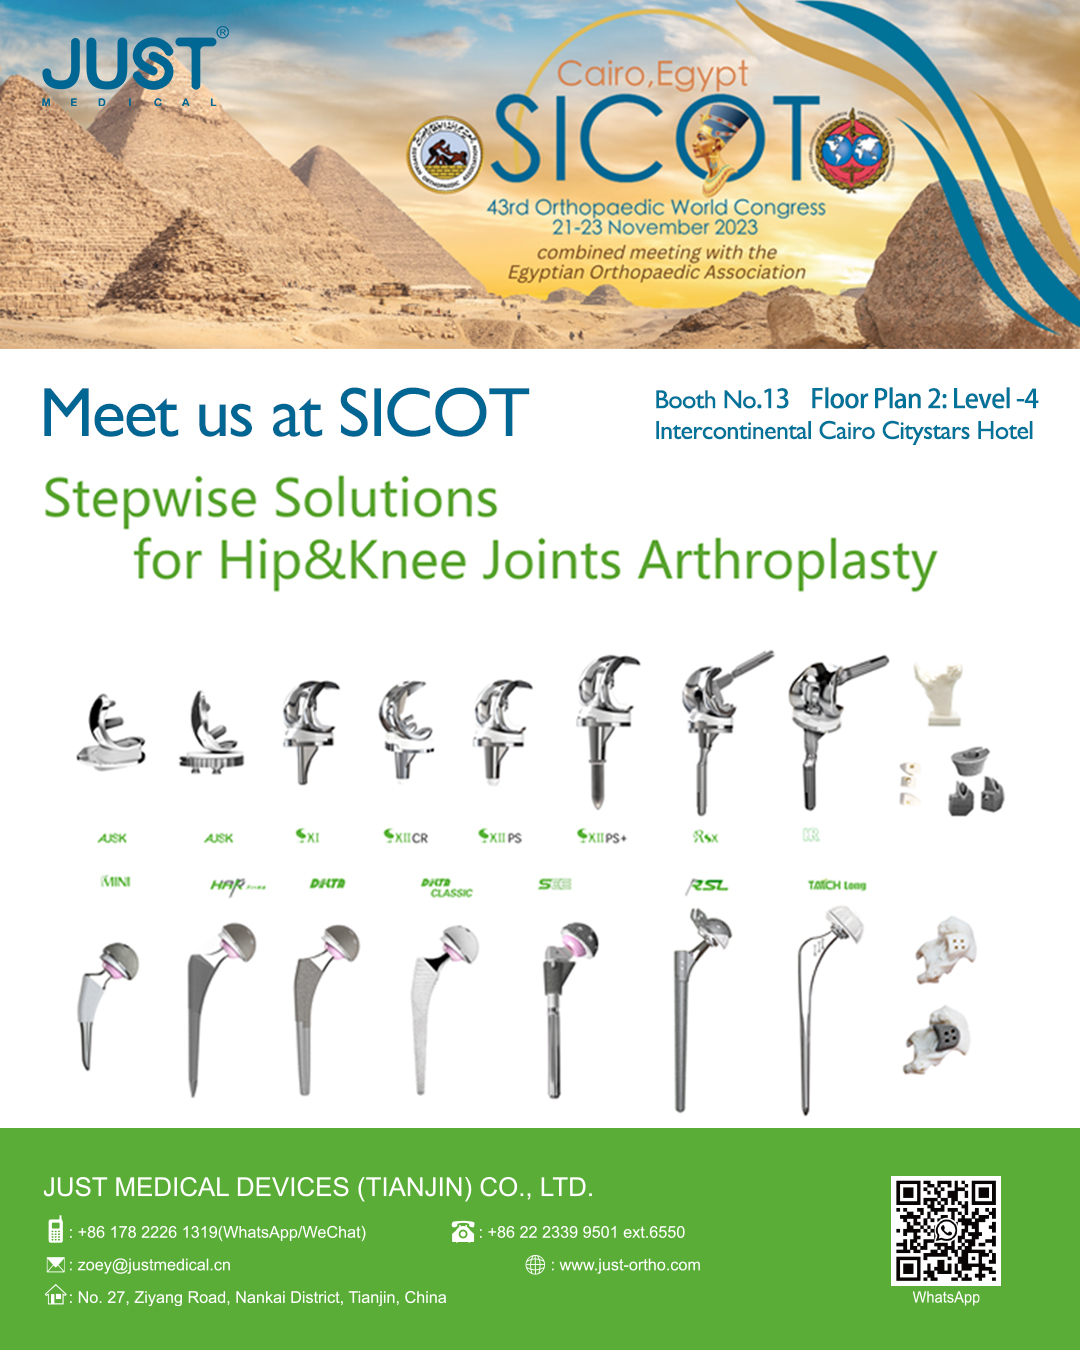 Meet us at the 43rd SICOT Orthopaedic World Congress